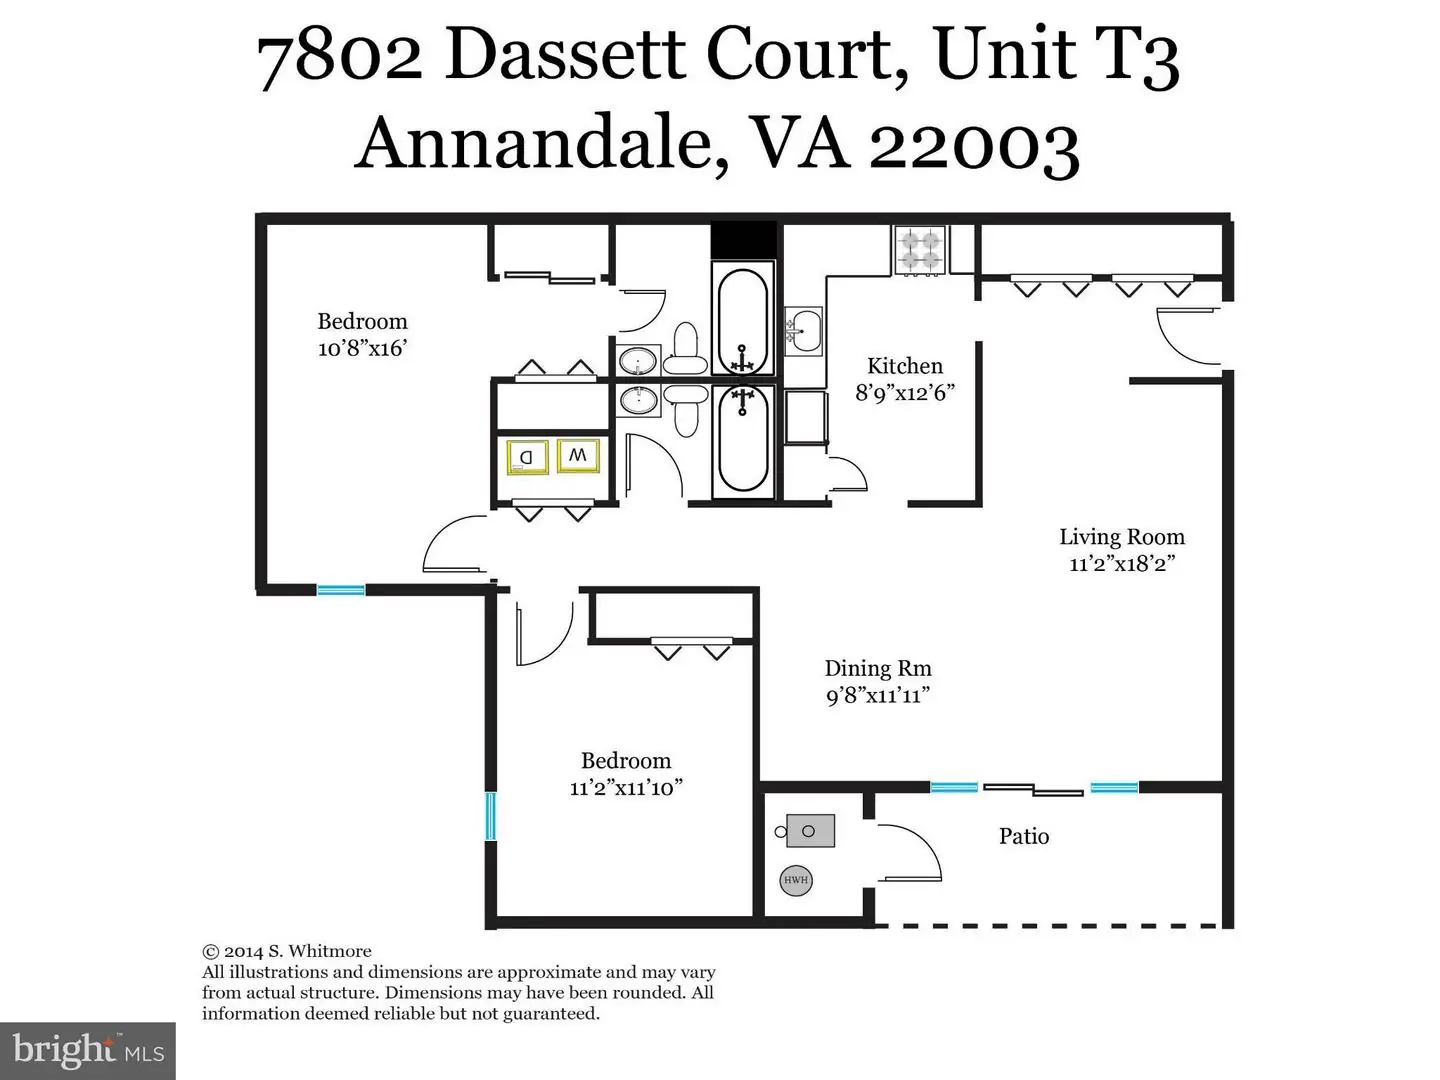 1003220072-300850423262-2021-09-07-14-23-57  |  Heritage Court | Annandale Delaware Real Estate For Sale | MLS# 1003220072  - Best of Northern Virginia